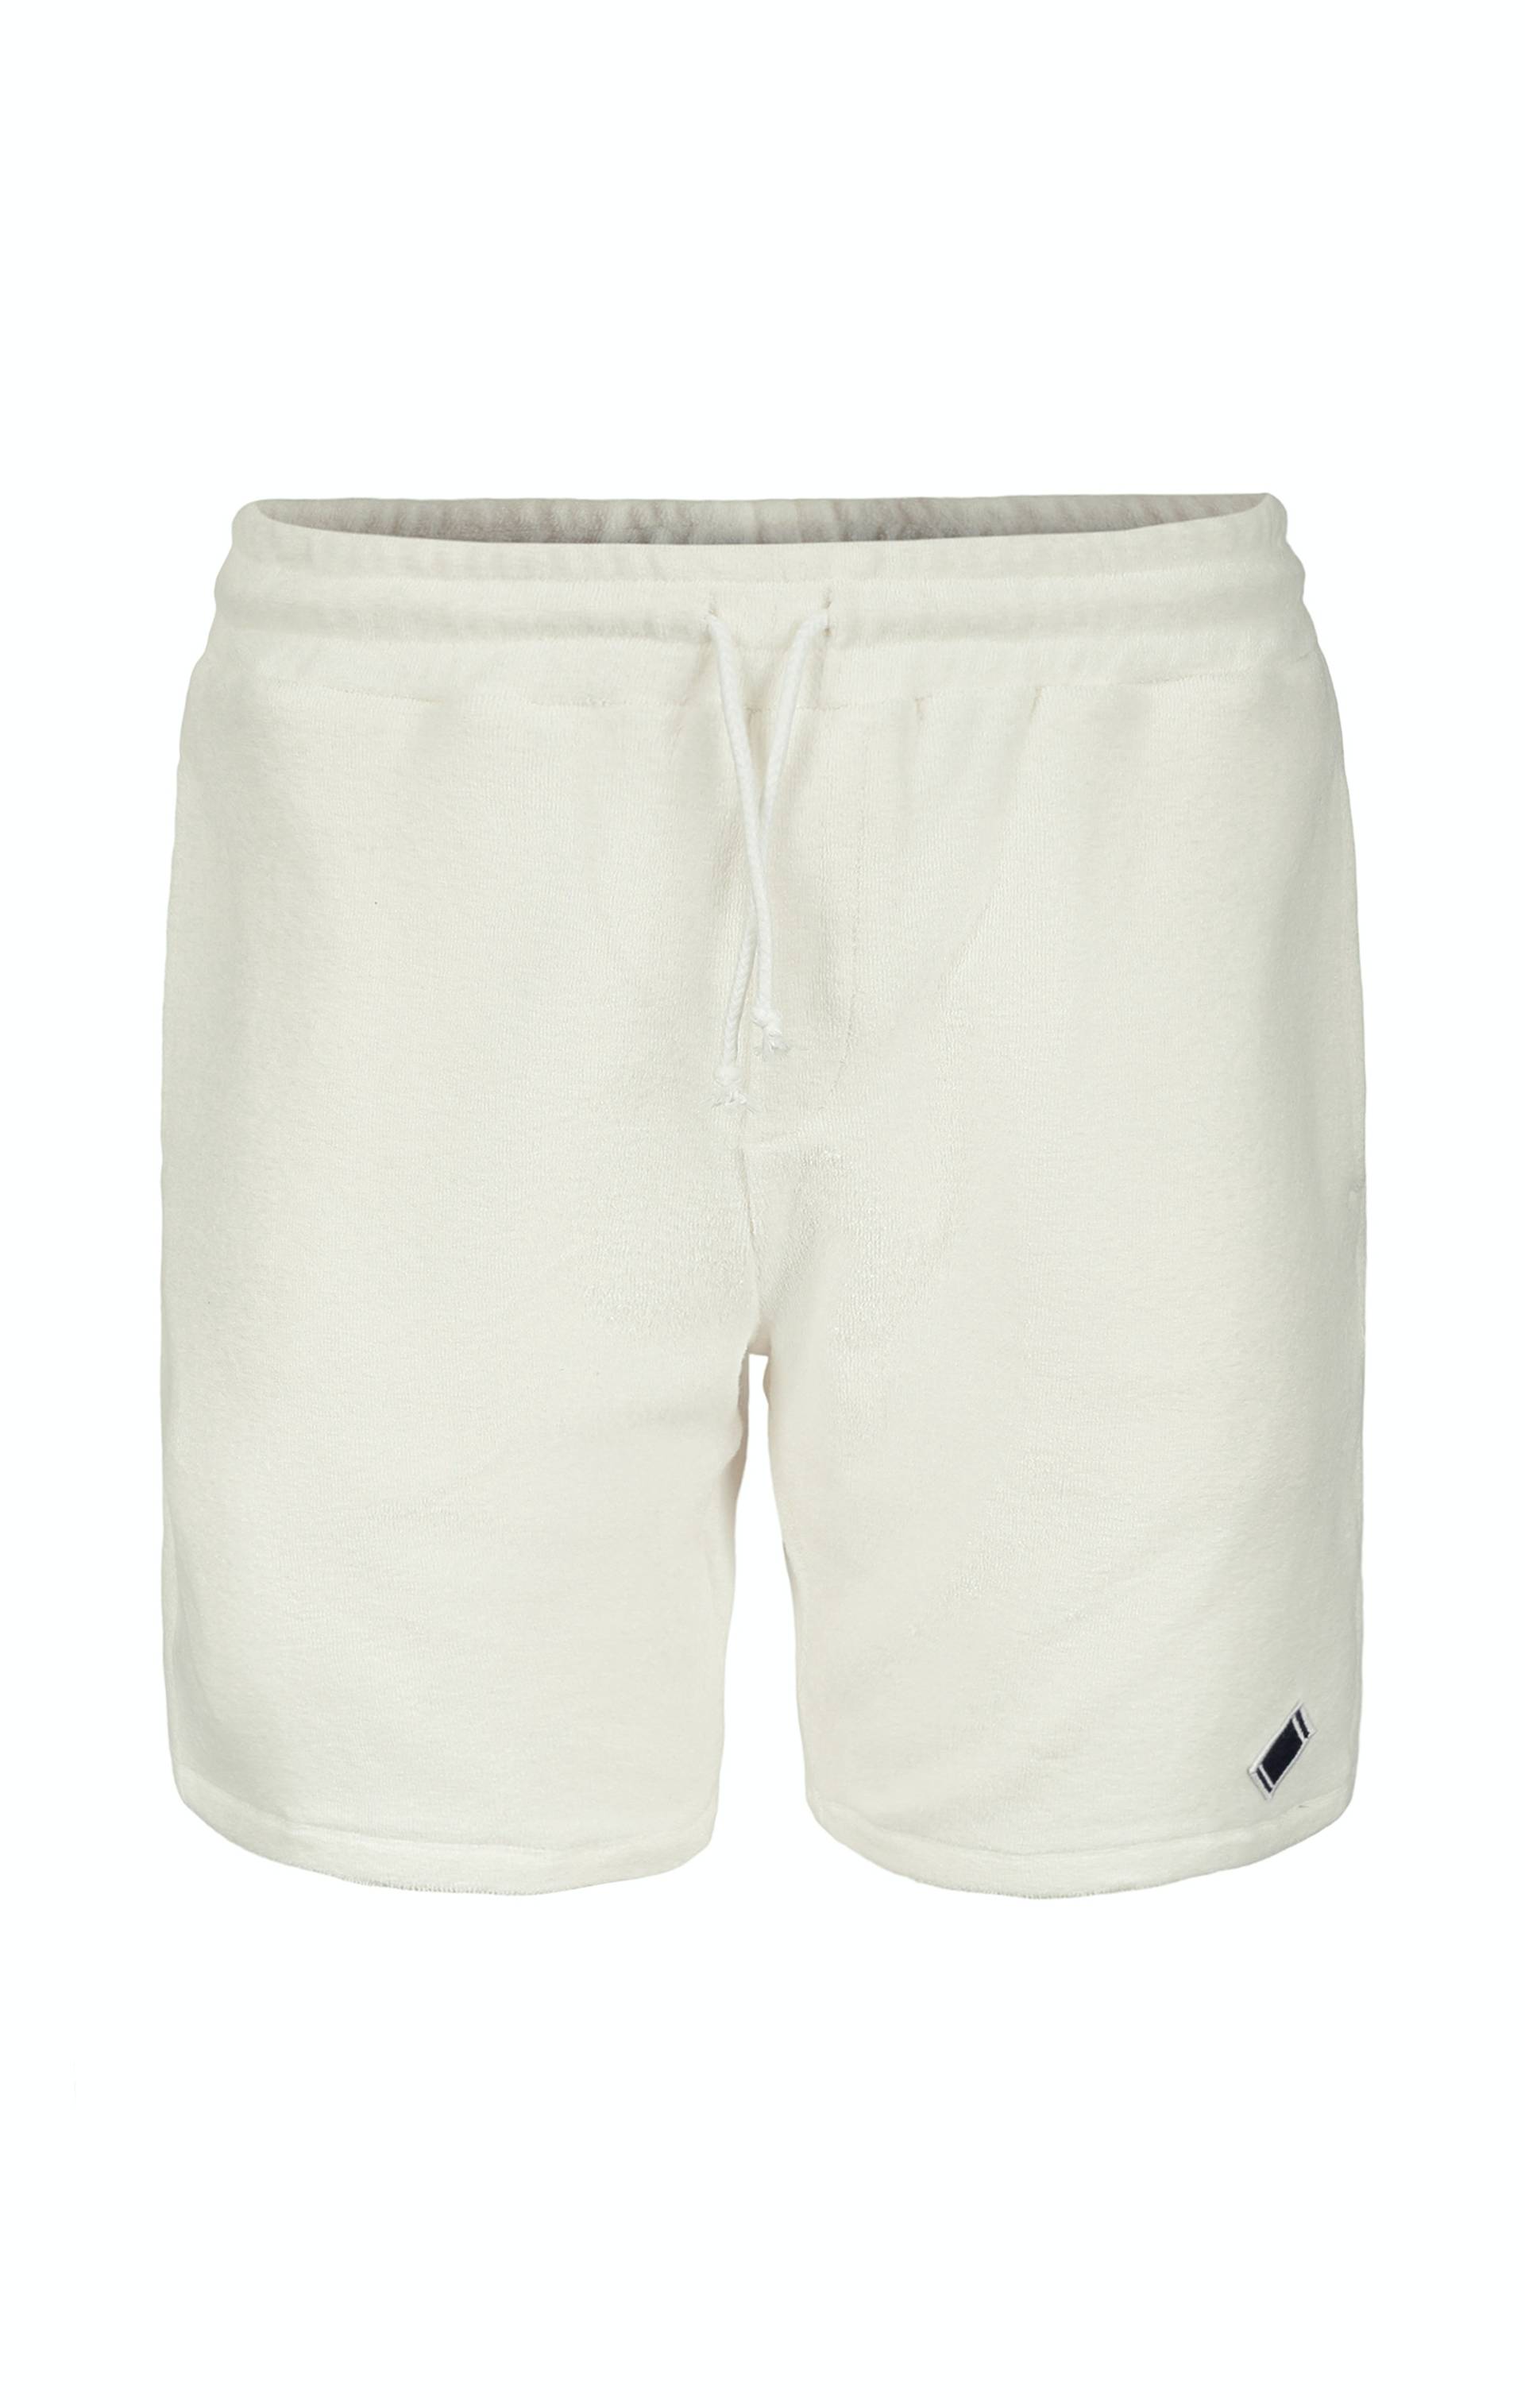 Onepiece Towel Club Shorts White - 1